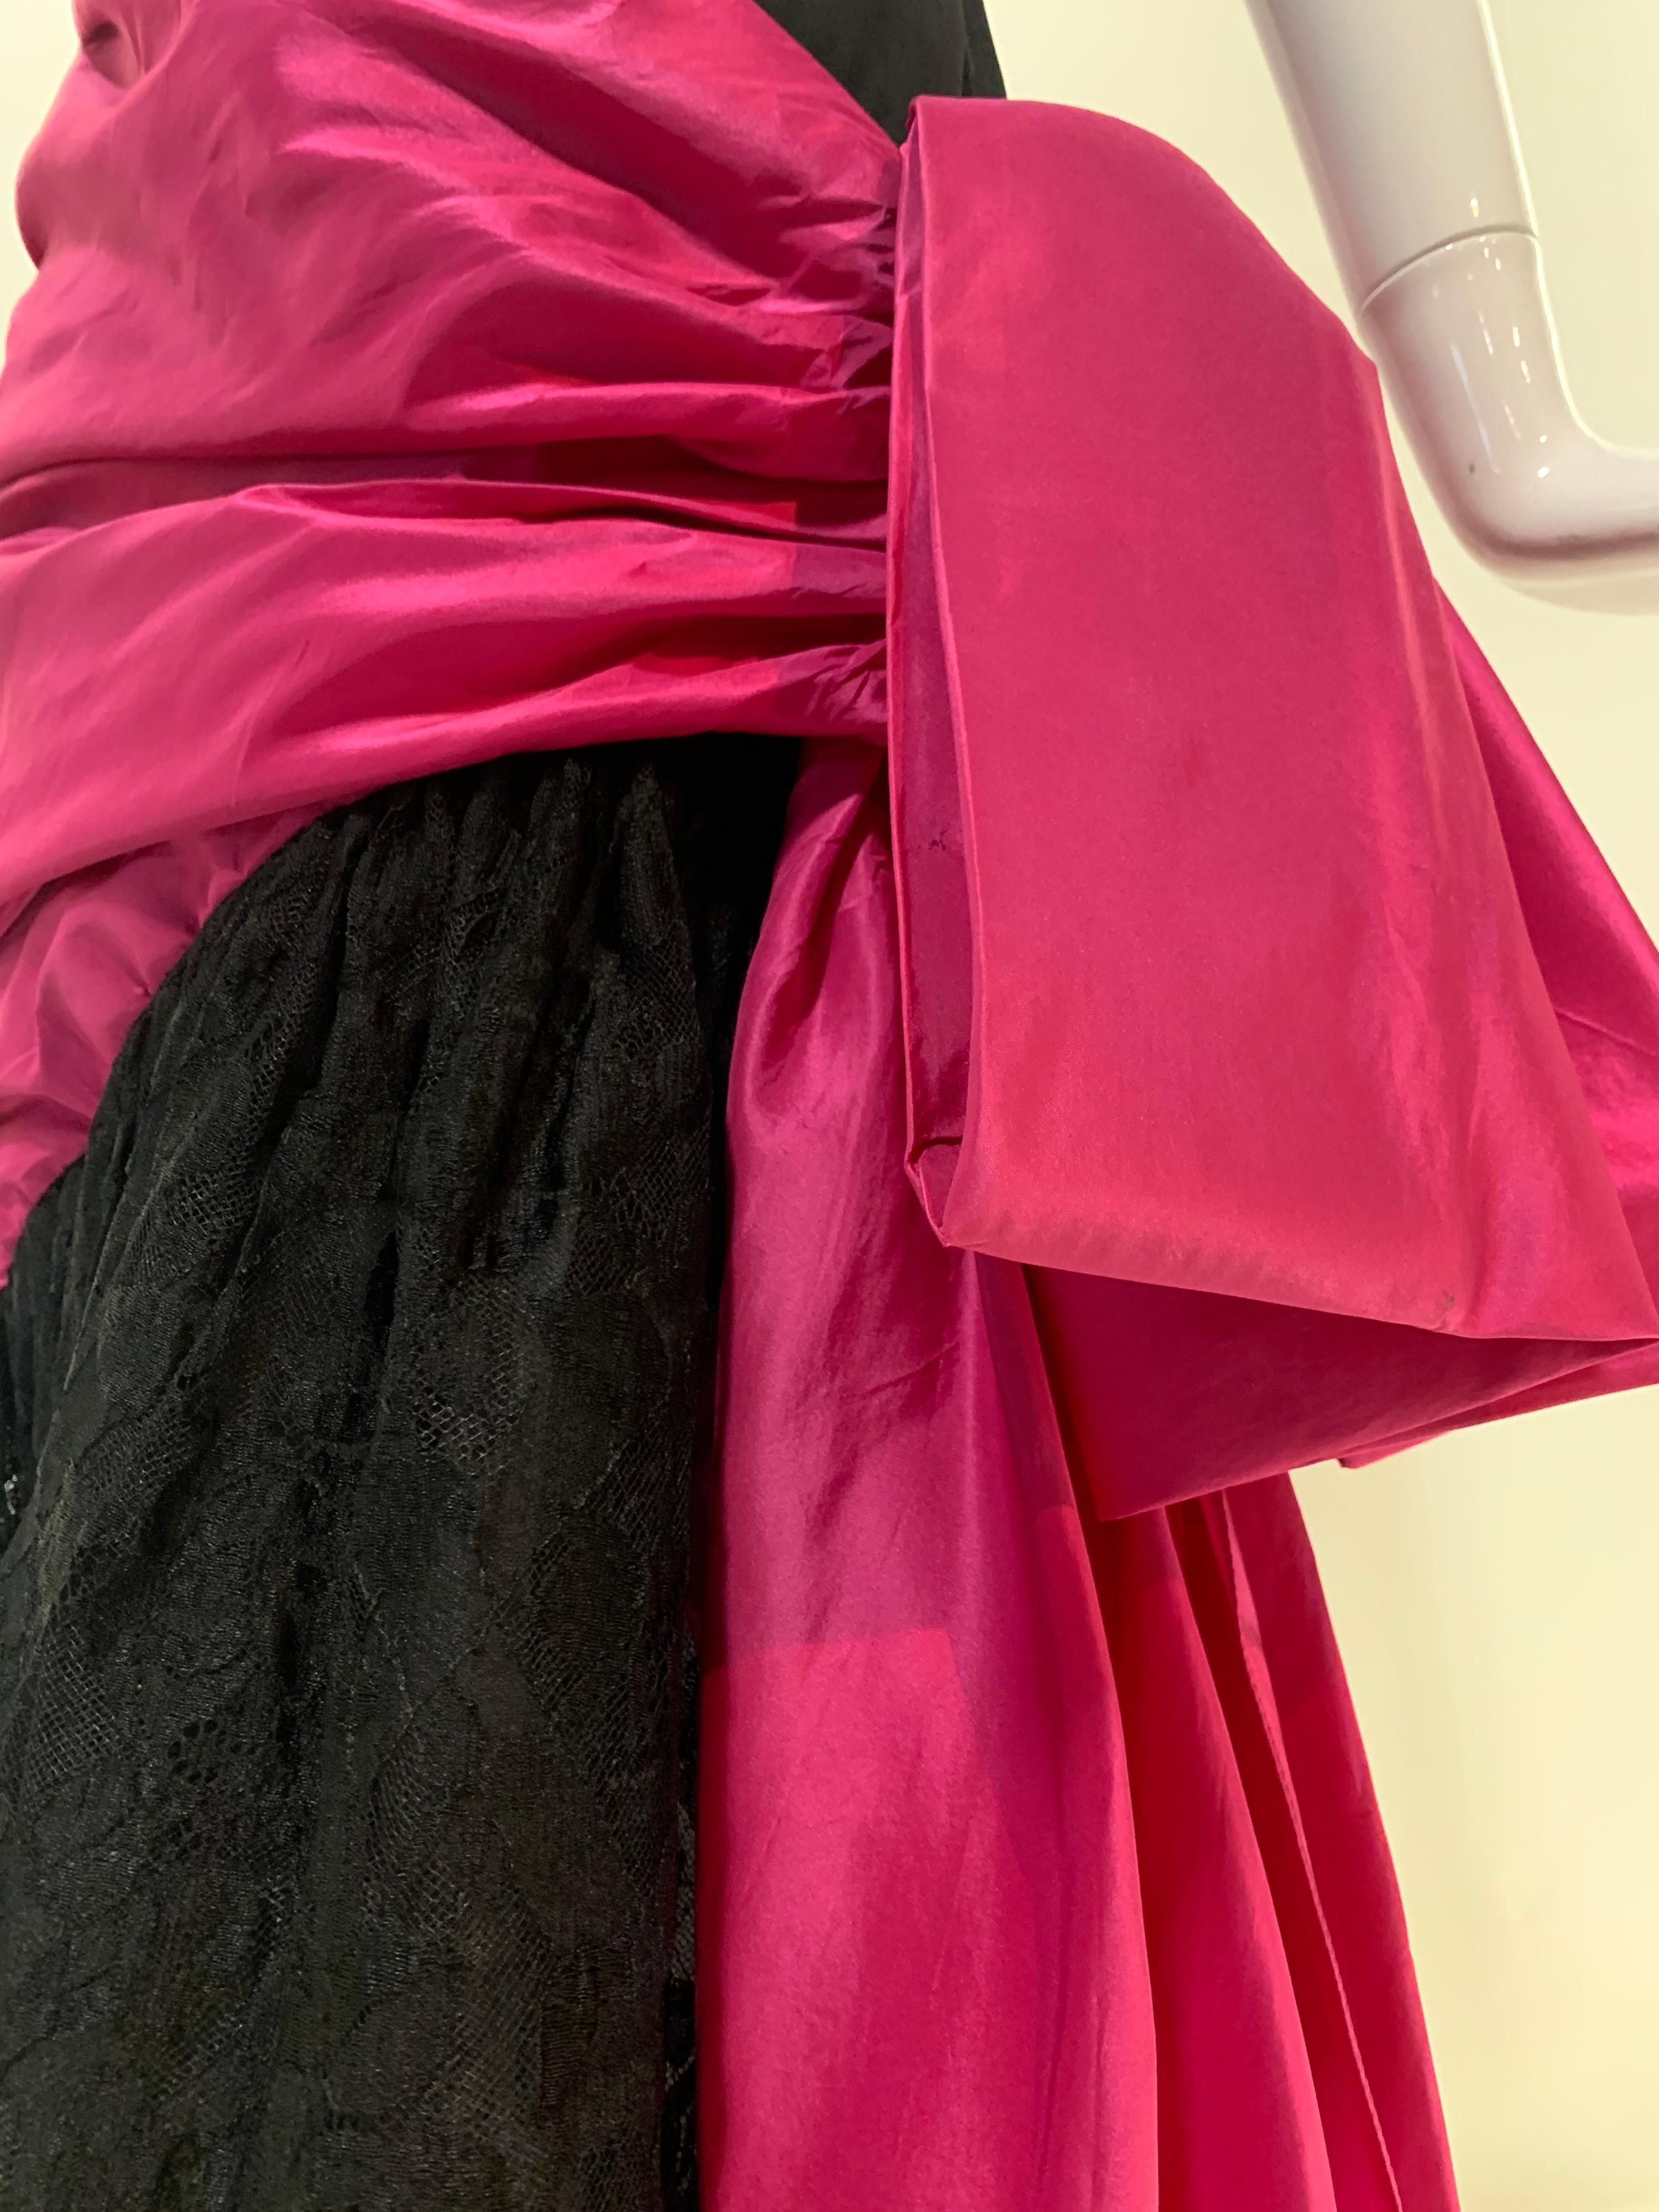 1980 Bill Blass Black Silk Crepe One-Shoulder Gown w/ Lace Skirt and Fuchsia Bow For Sale 15